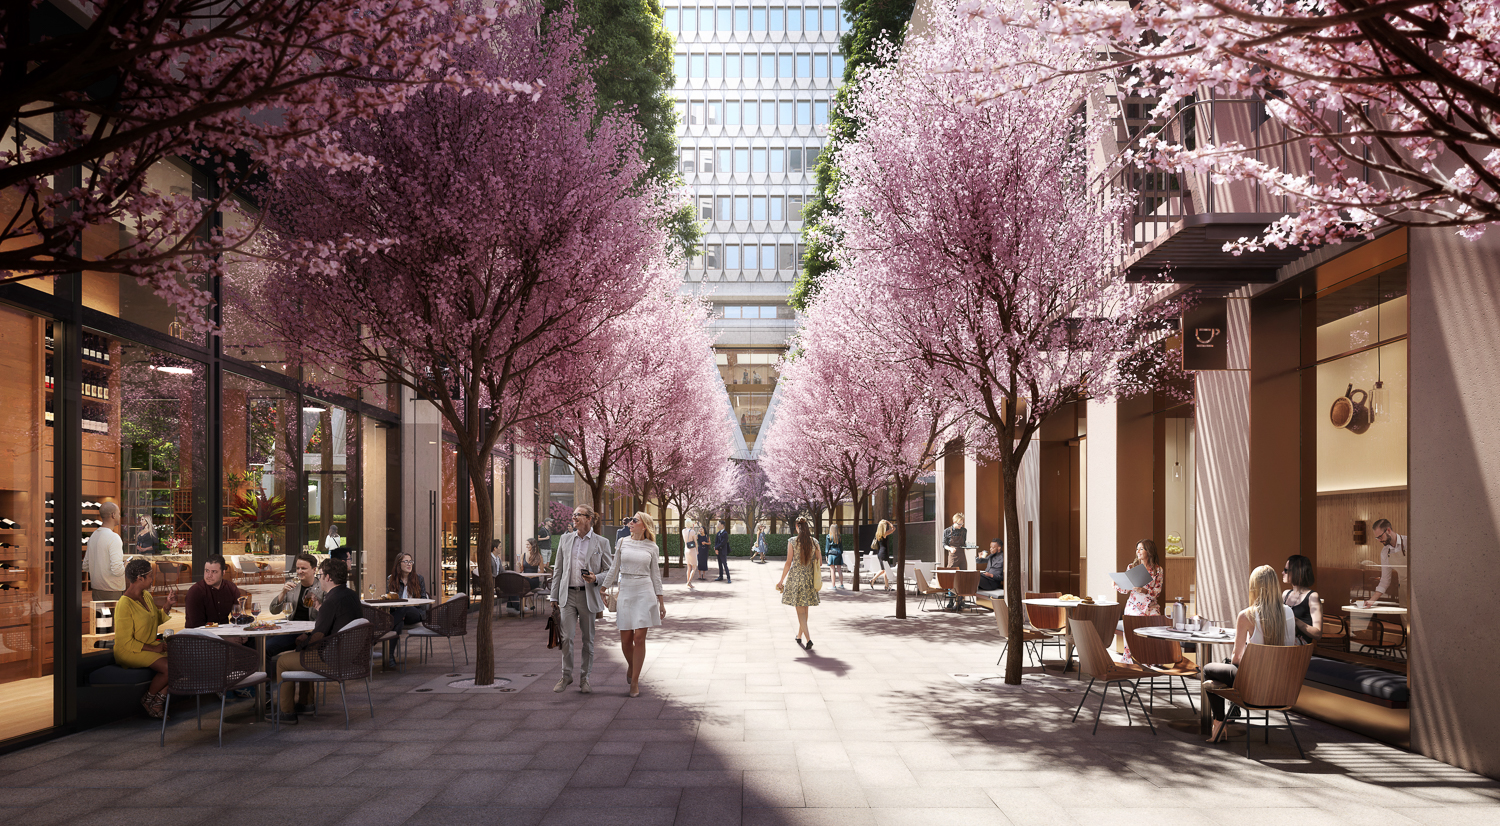 Future retail thoroughfare along Mark Twain in Transamerica complex redevelopment, rendering by Foster + Partners